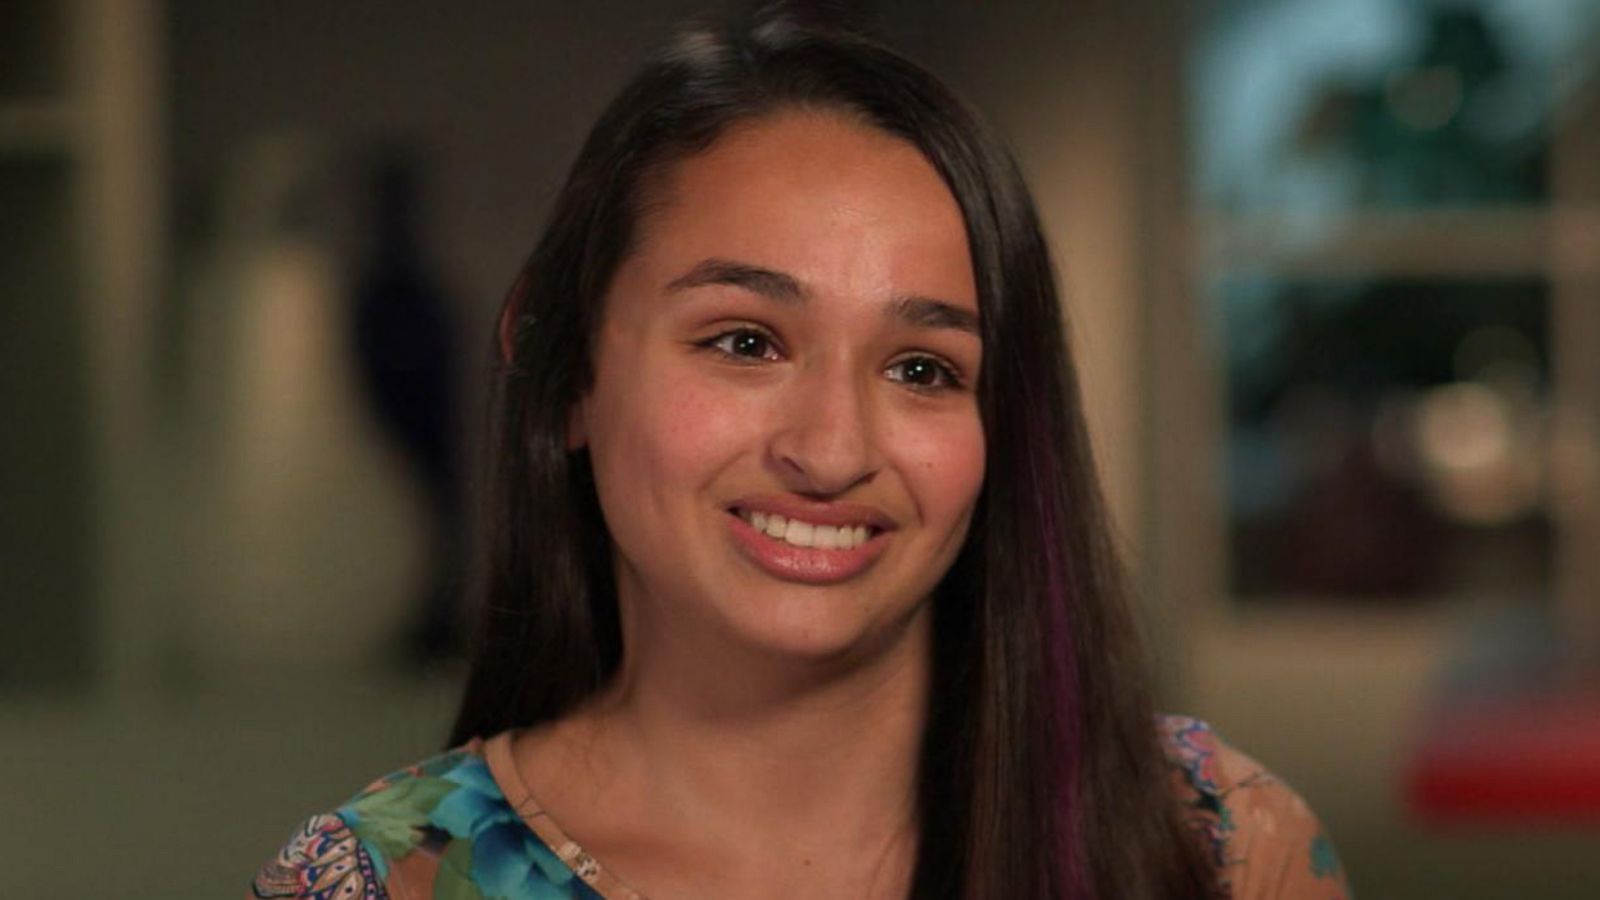 Trans advocate Jazz Jennings on life before, after gender confirmation